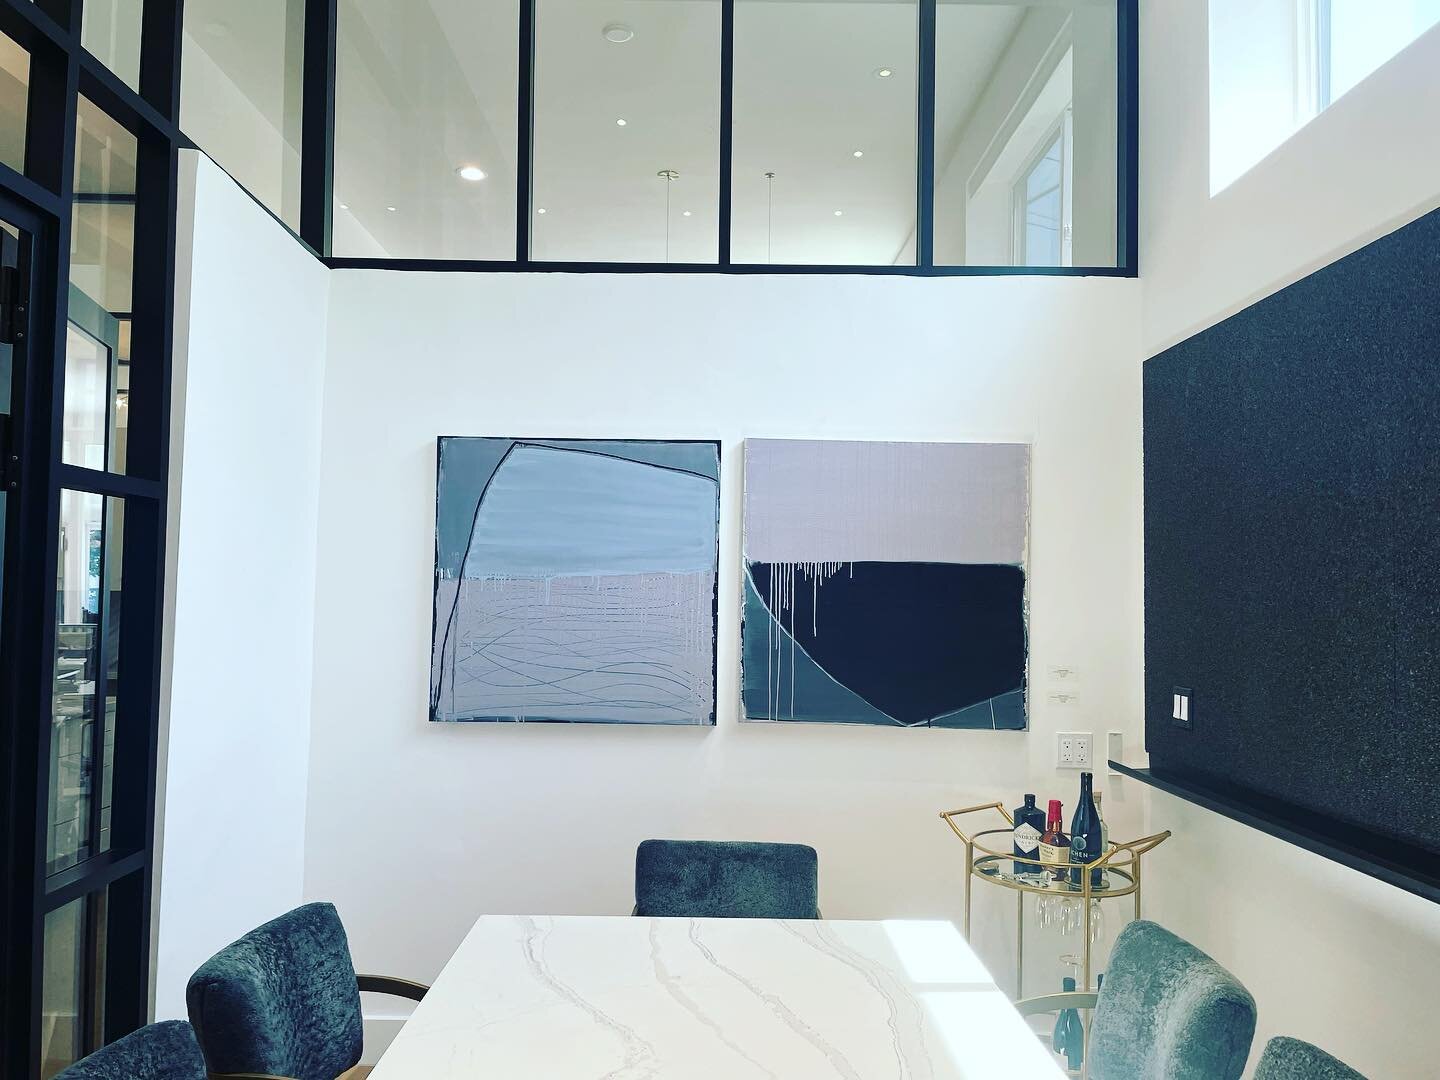 On another note Would like to share a recent installation of my work at the talented interior designer&rsquo;s office of @hshinteriors this diptych is looking lovely in the conference room ( if I don&rsquo;t say so myself) 
#artlovers #apair #artwork